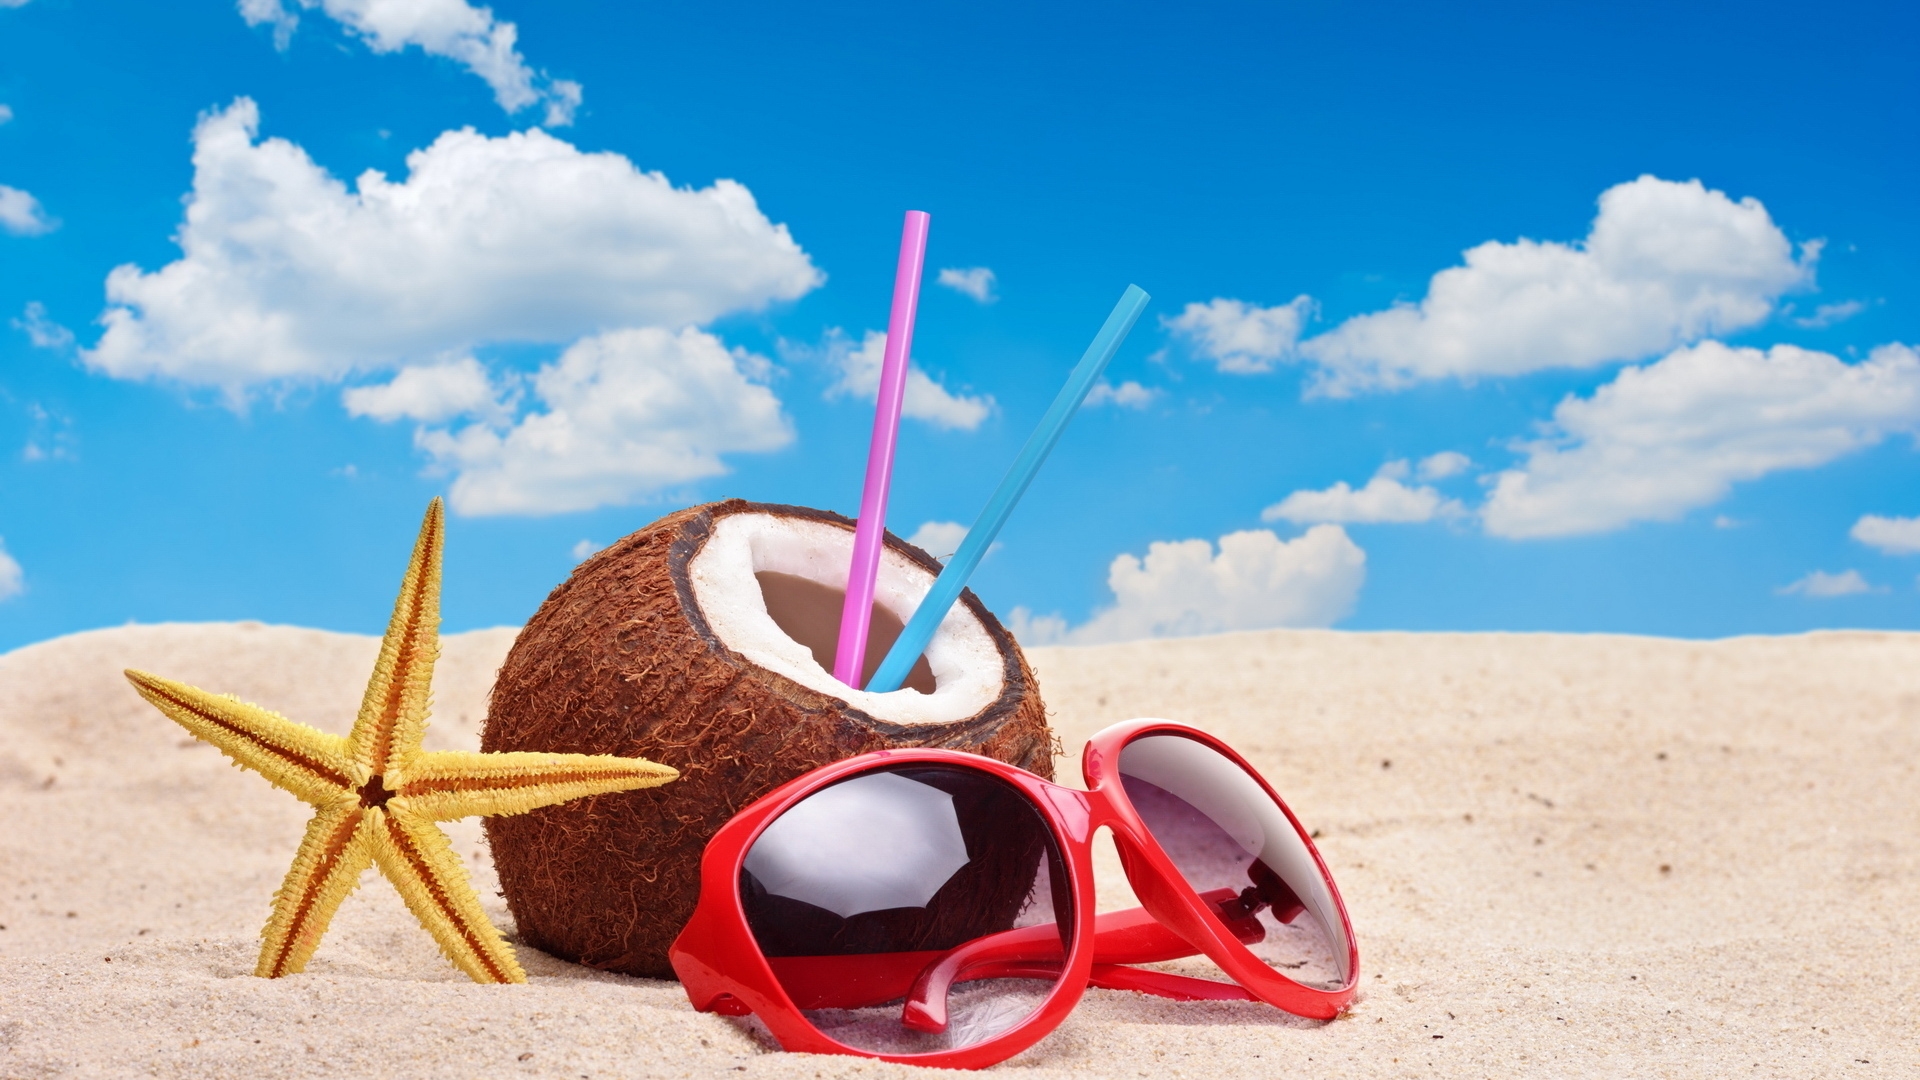 Colourful Summer Accessories for 1920 x 1080 HDTV 1080p resolution